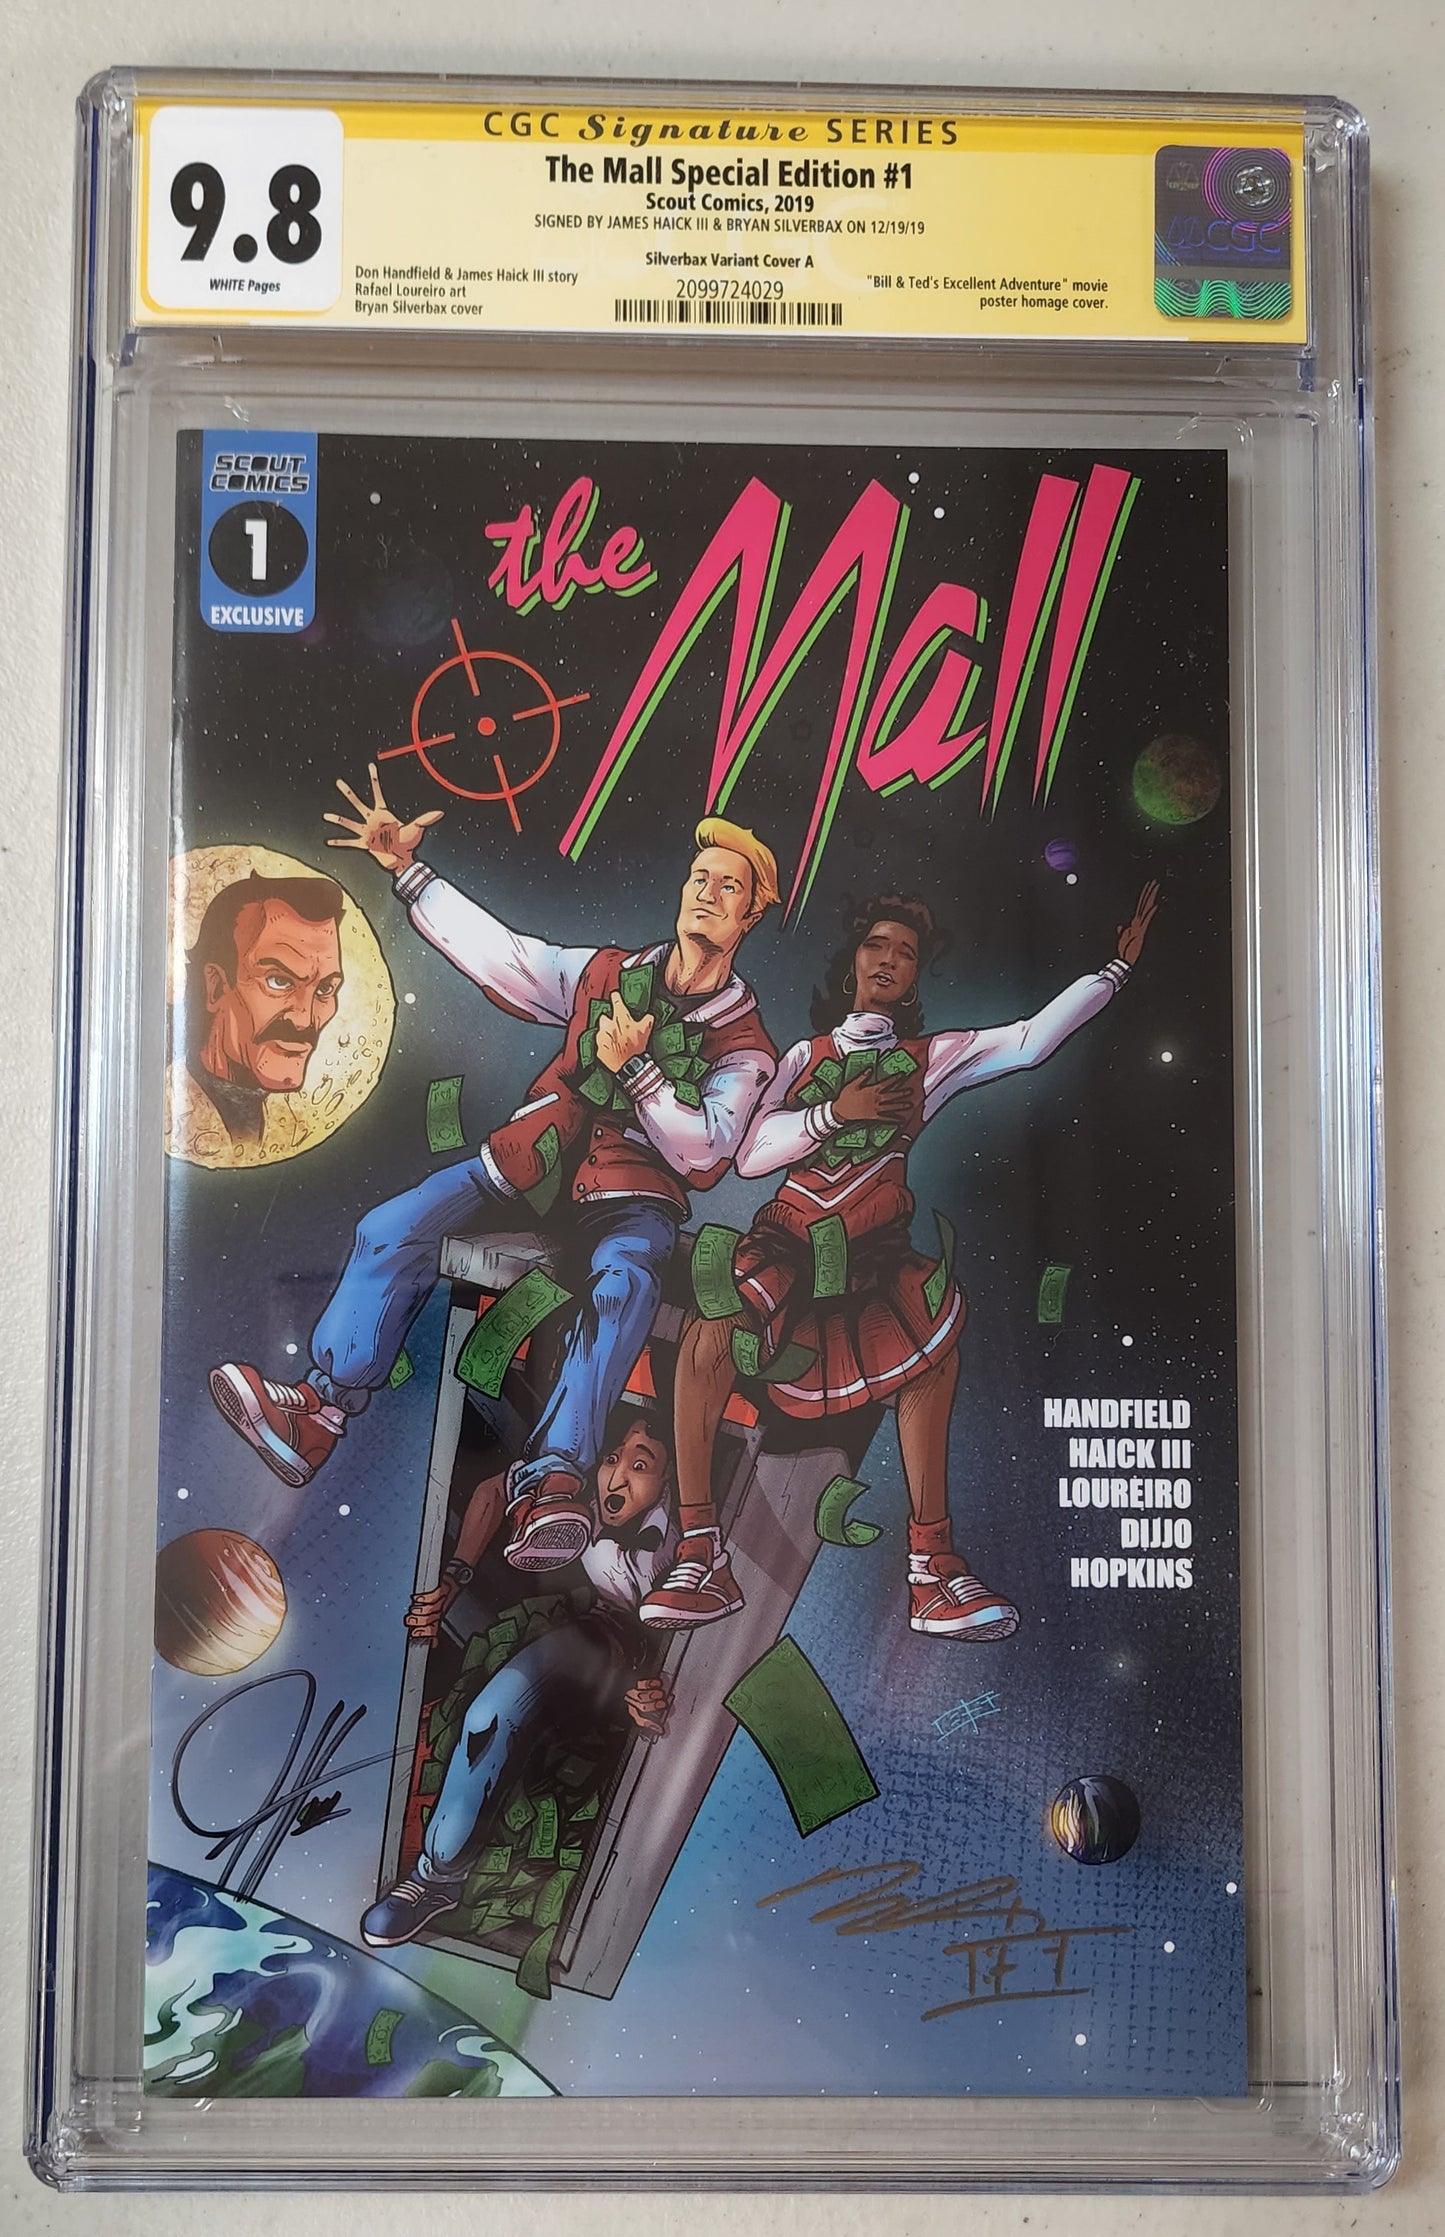 9.8 CGC MALL SPECIAL EDITION #1 HOMAGE VARIANT SIGNED BY JAMES HAICK III & BRYAN SILVERBAX 2019 [2099724029]